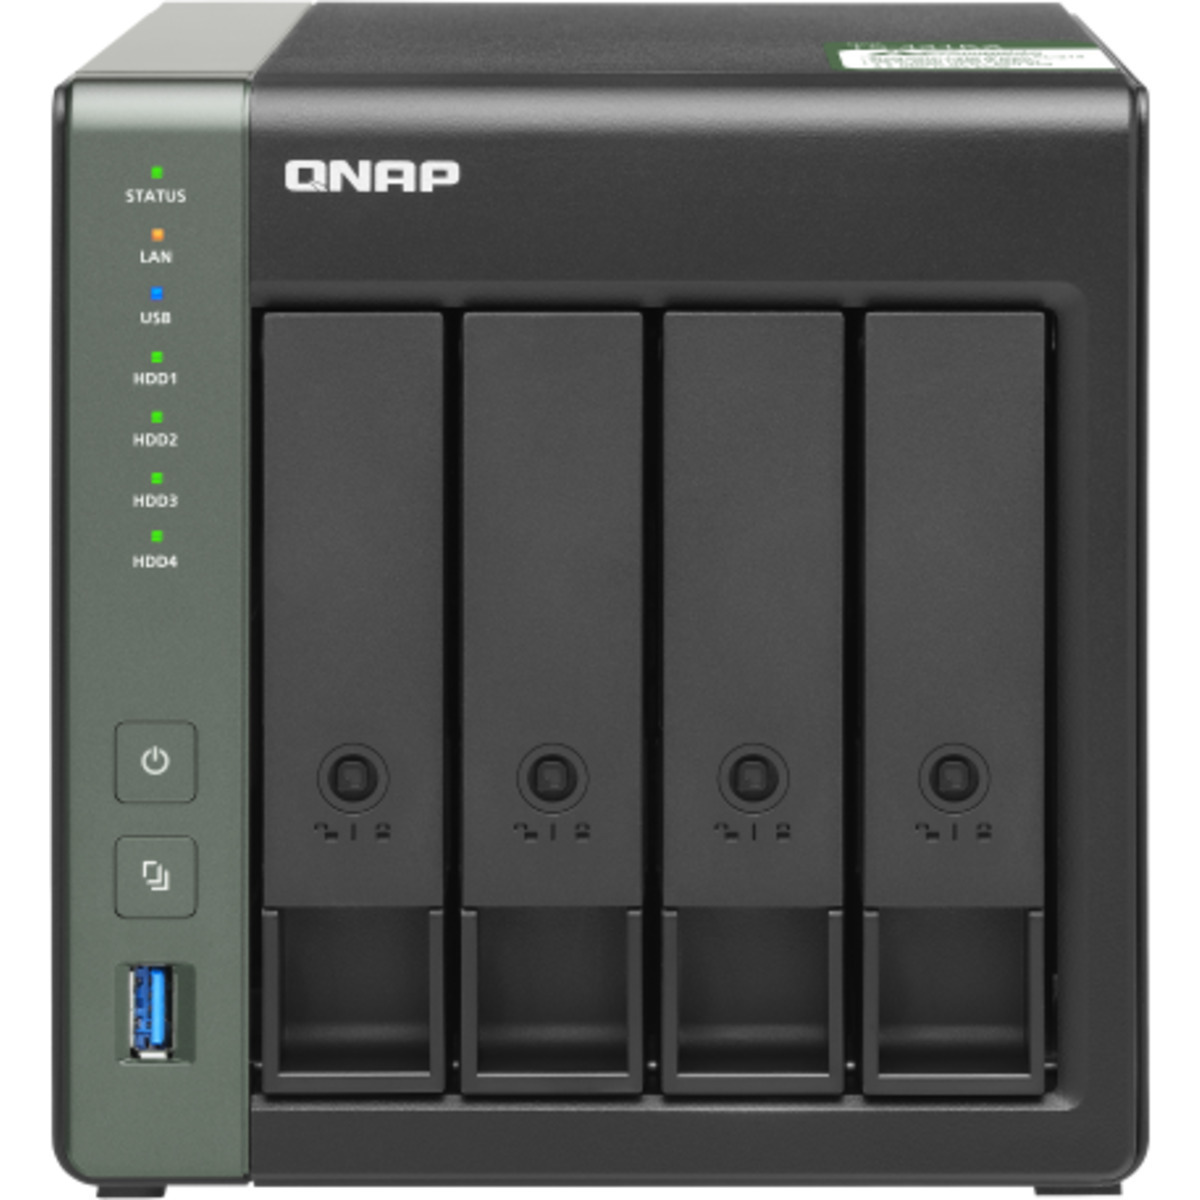 buy QNAP TS-431KX Desktop NAS - Network Attached Storage Device Burn-In Tested Configurations - FREE RAM UPGRADE - nas headquarters buy network attached storage server device das new raid-5 free shipping usa christmas new year holiday sale TS-431KX